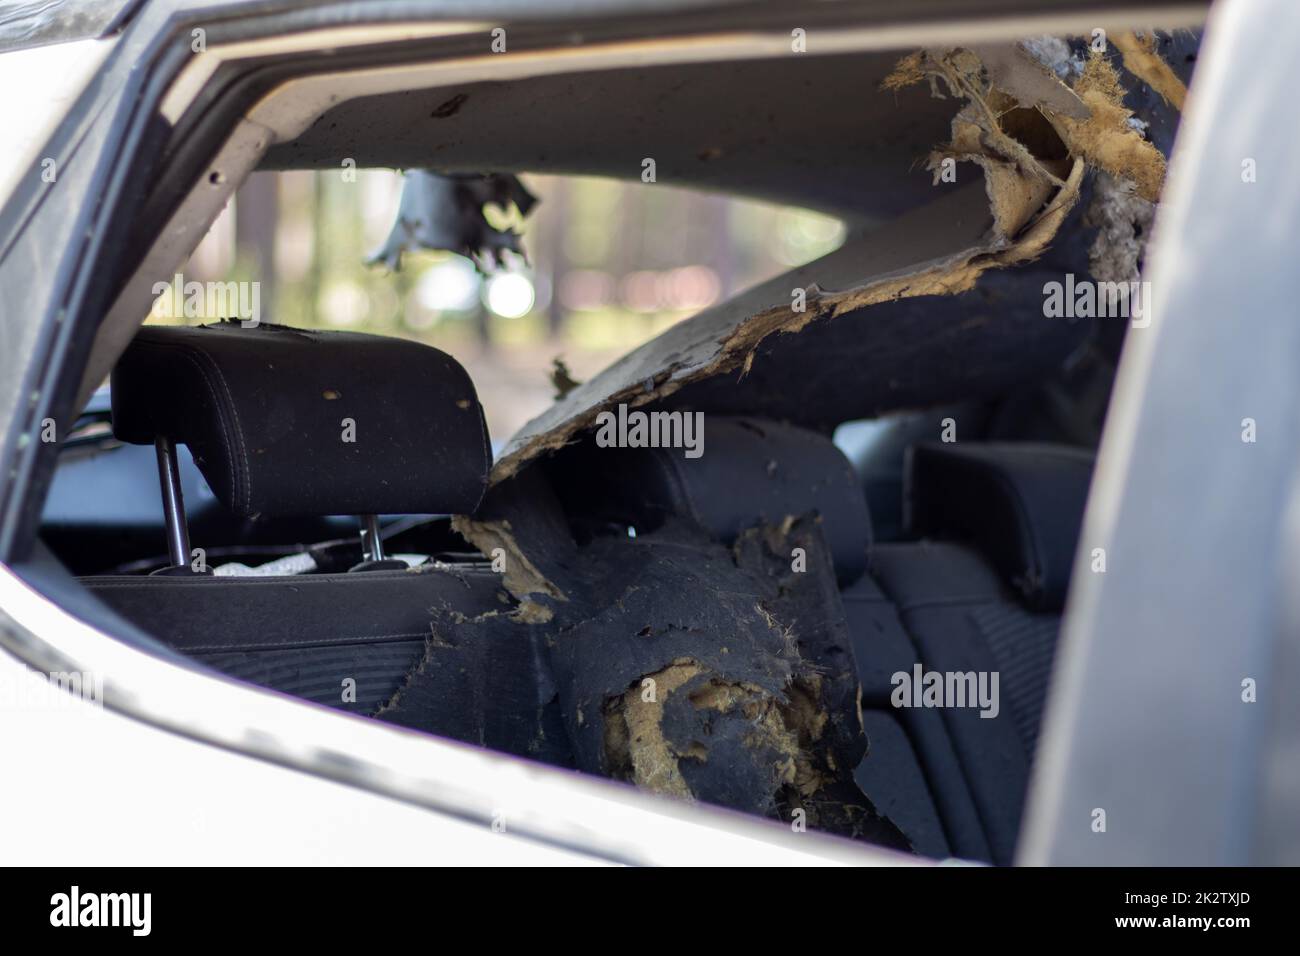 https://c8.alamy.com/comp/2K2TXJD/a-car-after-an-accident-with-a-broken-rear-and-side-glass-view-from-the-rear-window-broken-window-in-a-vehicle-the-wreckage-of-the-saloon-a-detailed-close-up-view-of-the-damaged-car-2K2TXJD.jpg